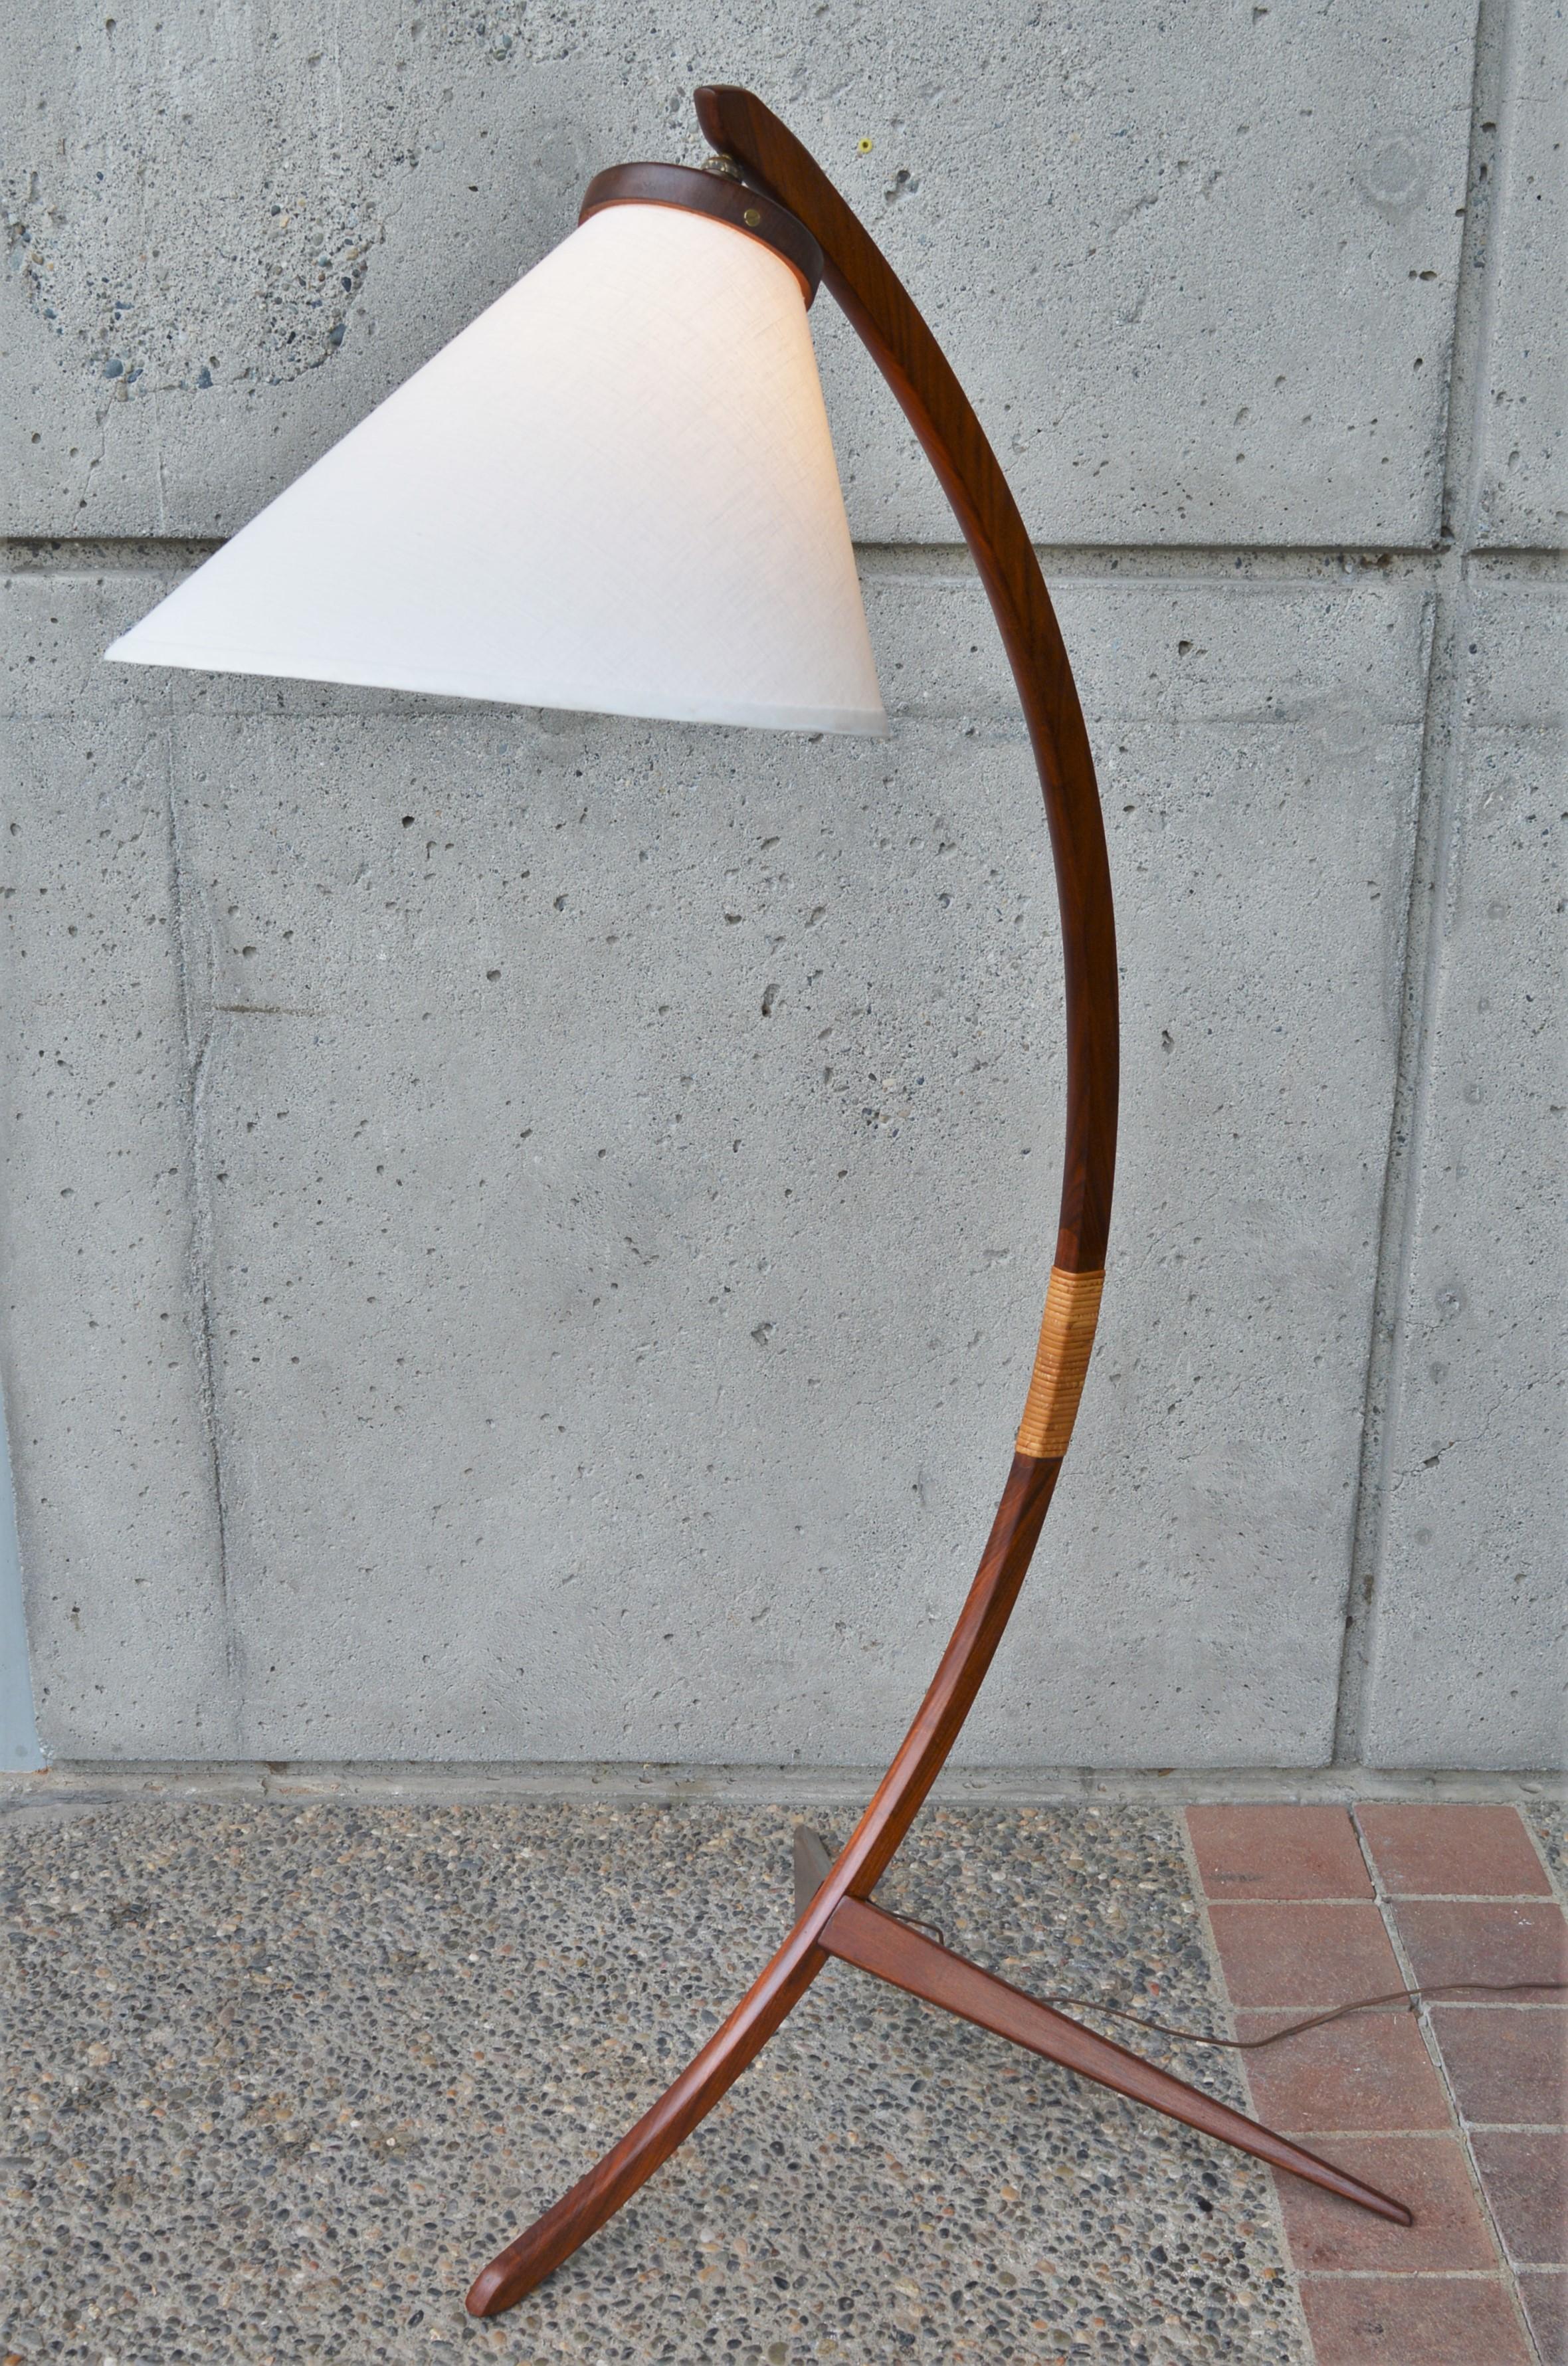 Danish Teak Arc or Bow Tripod Floor Lamp with New Bonnet Shade, Rispal Style In Good Condition In New Westminster, British Columbia